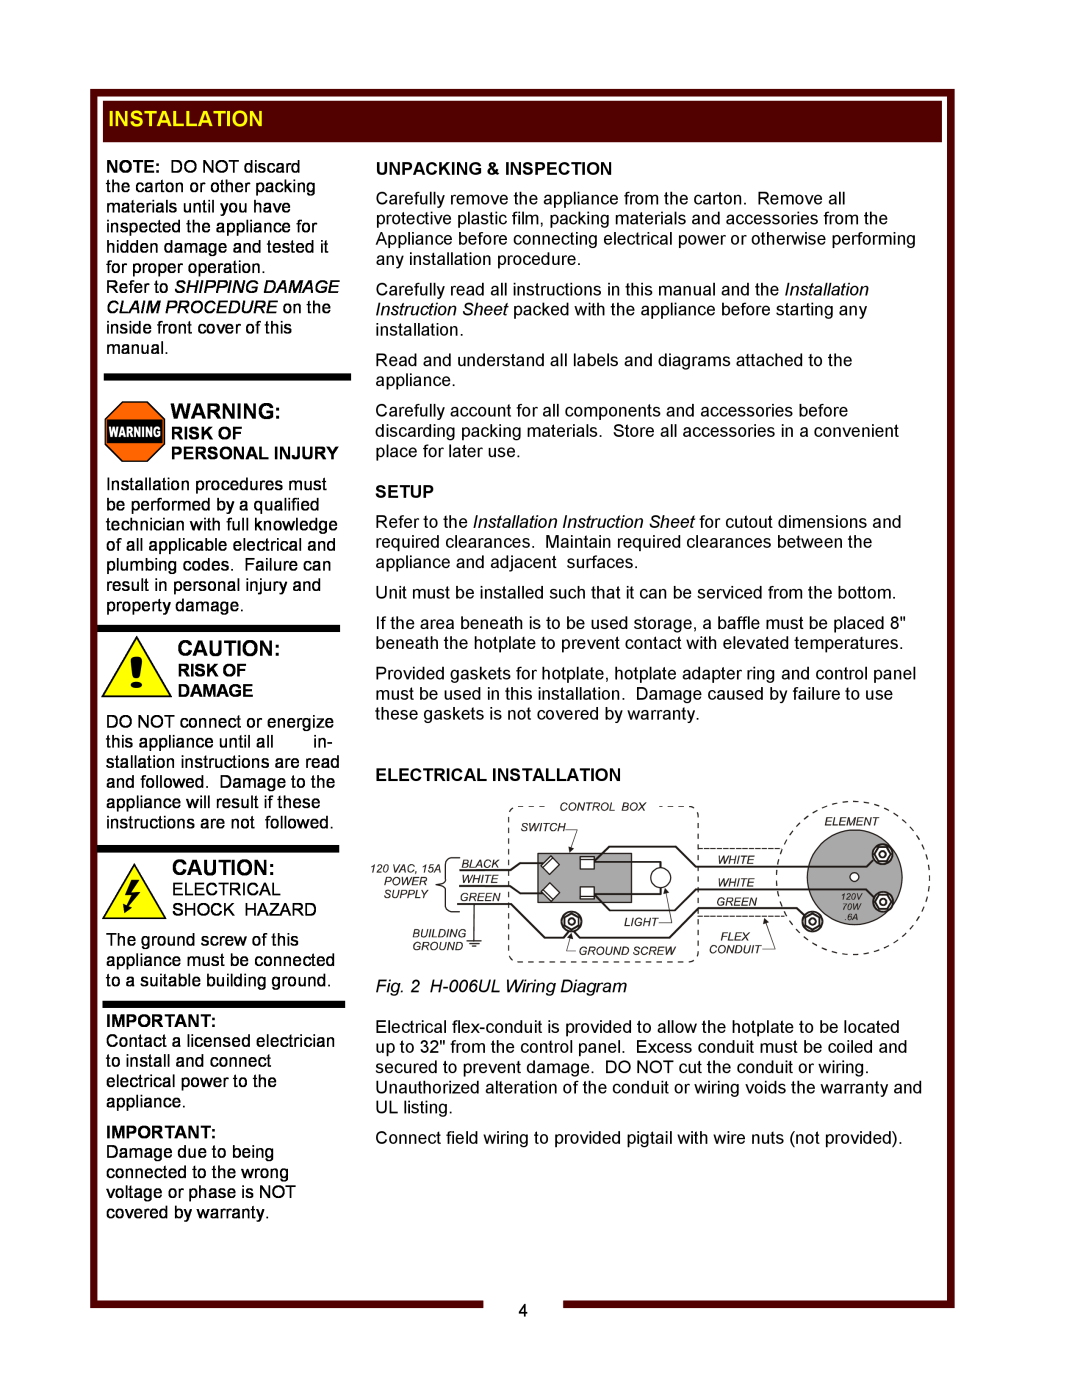 Wells Installation, Risk Of Personal Injury, Risk Of Damage, Unpacking & Inspection, Setup, H-006UL Wiring Diagram 